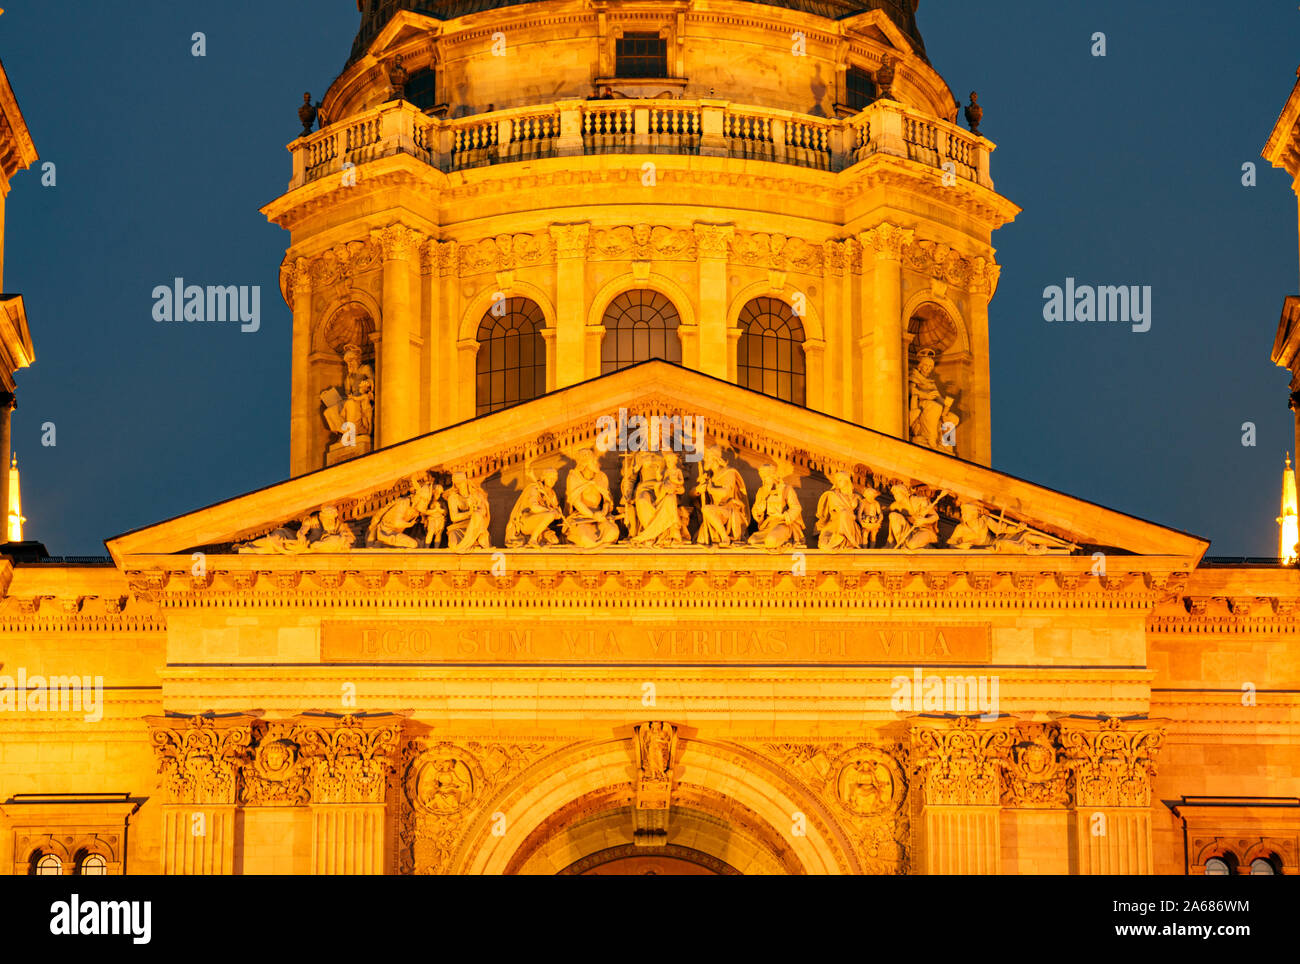 Triangular tympanum of the St. Stephen's Basilica facade, decorated with christian themed statues lit by yellow light after sunset, Budapest, Hungary. Stock Photo